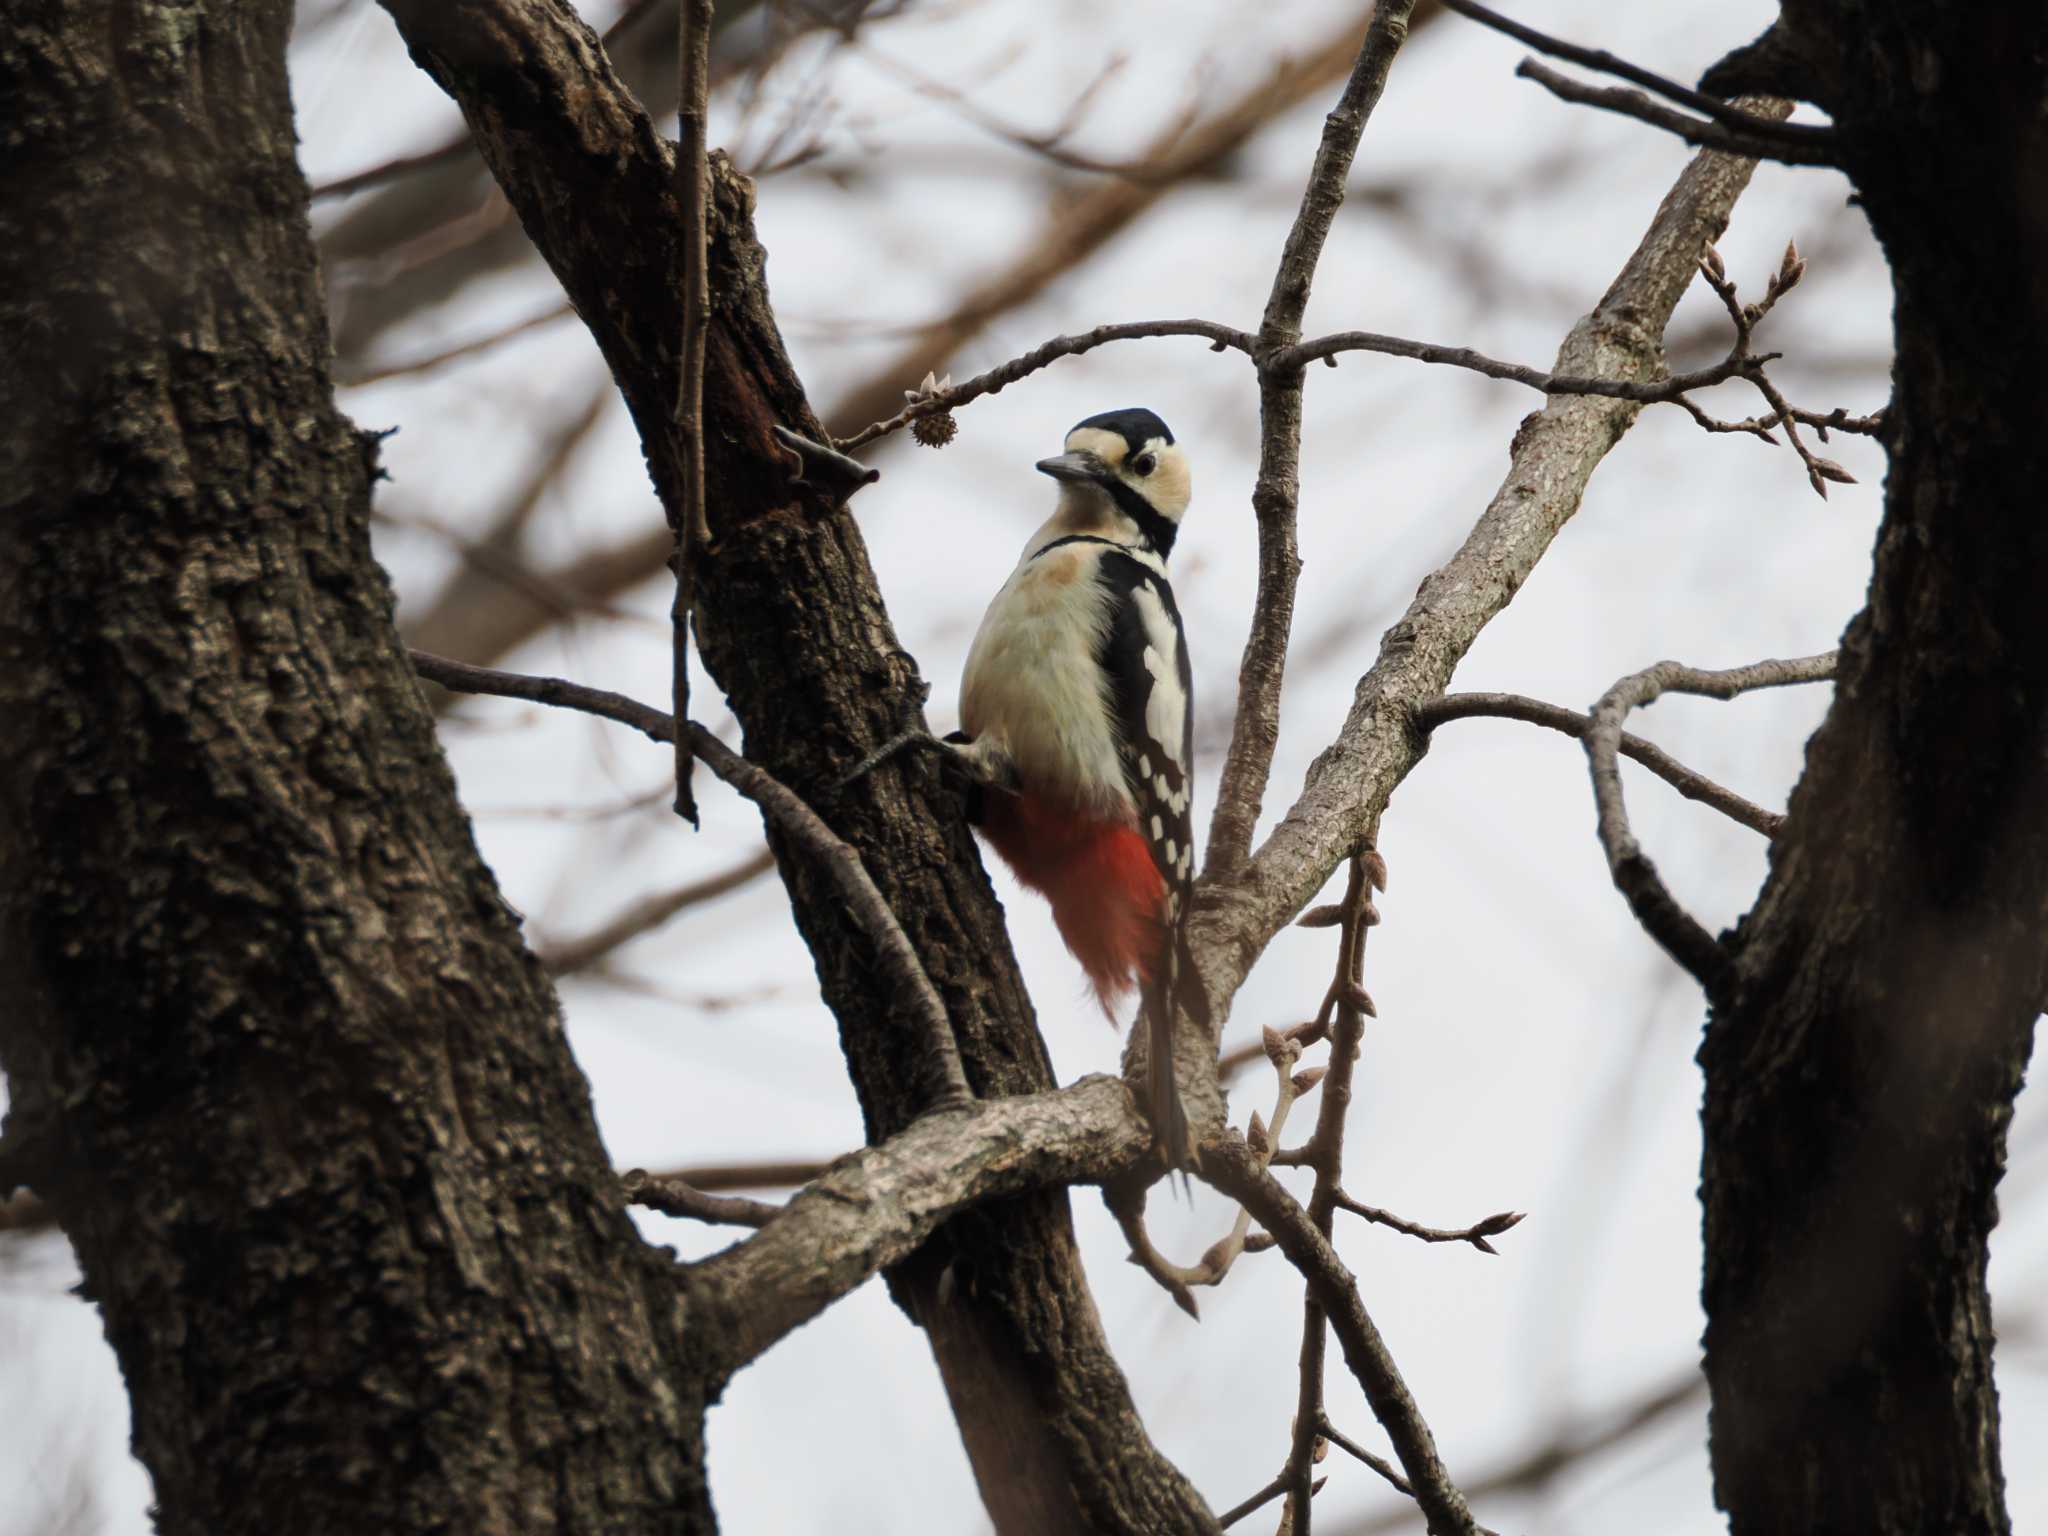 Photo of Great Spotted Woodpecker at Kodomo Shizen Park by こむぎこねこ